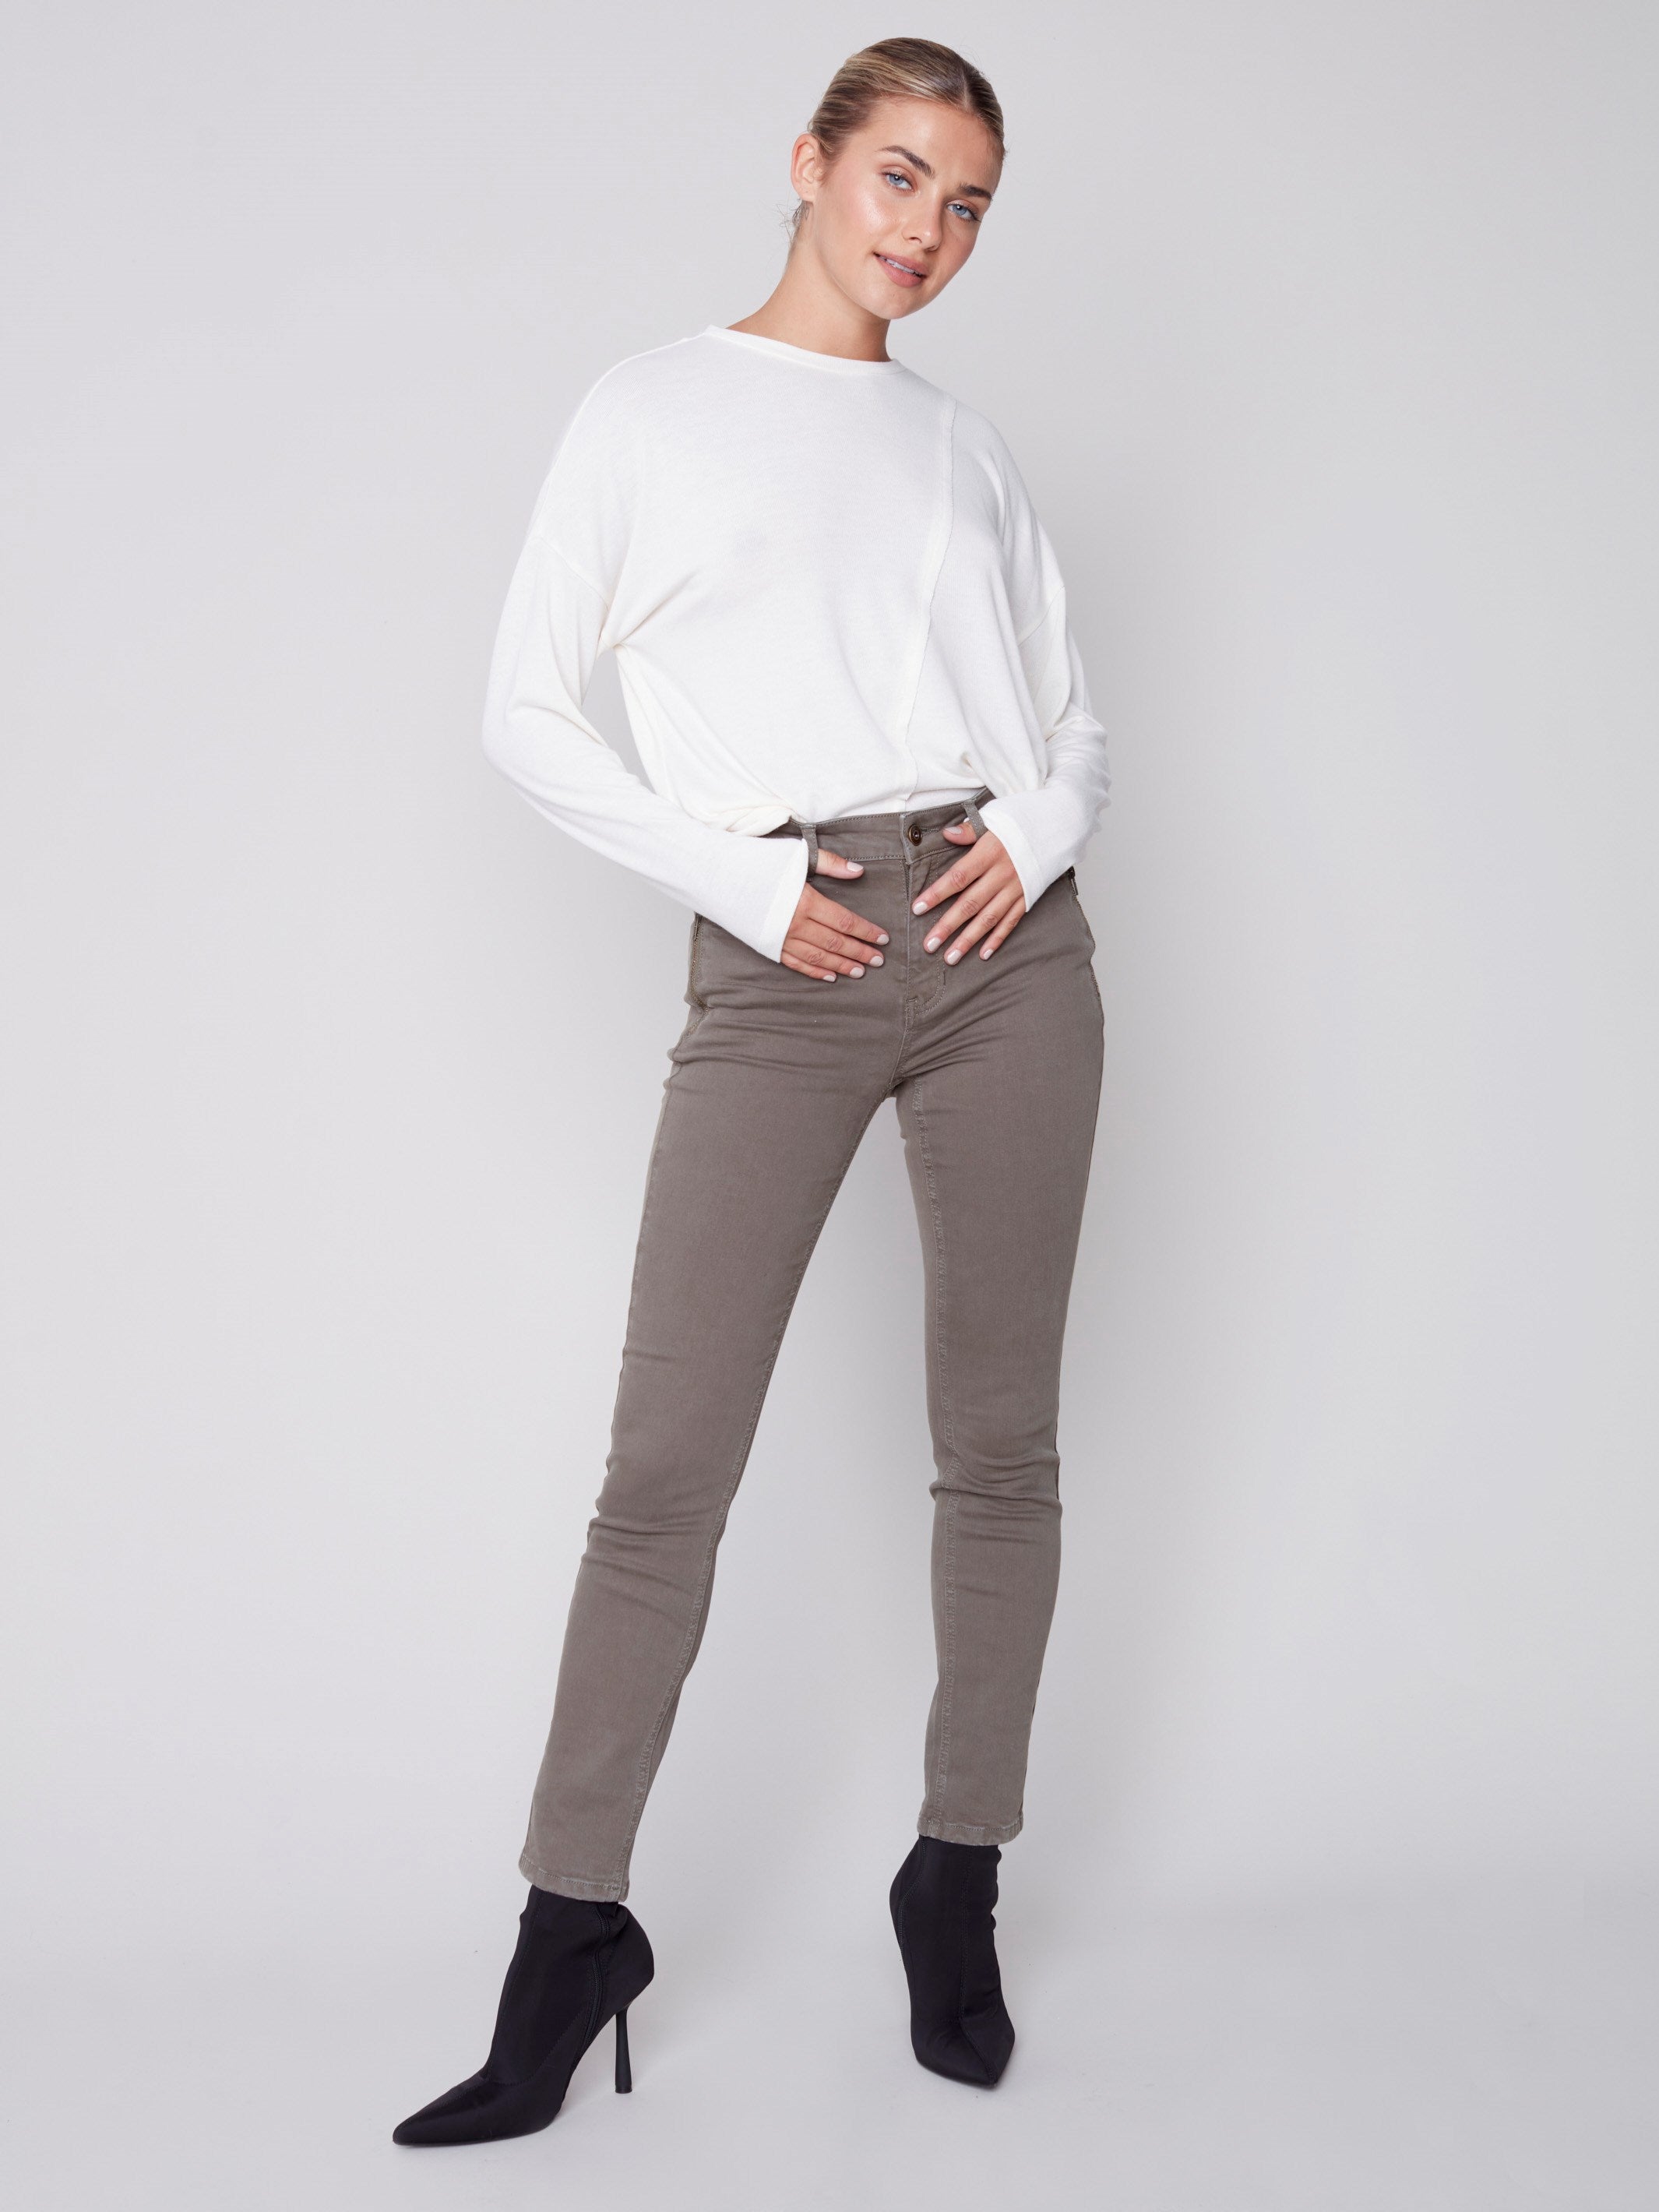 Twill Pants with Zipper Pocket Detail - Spruce